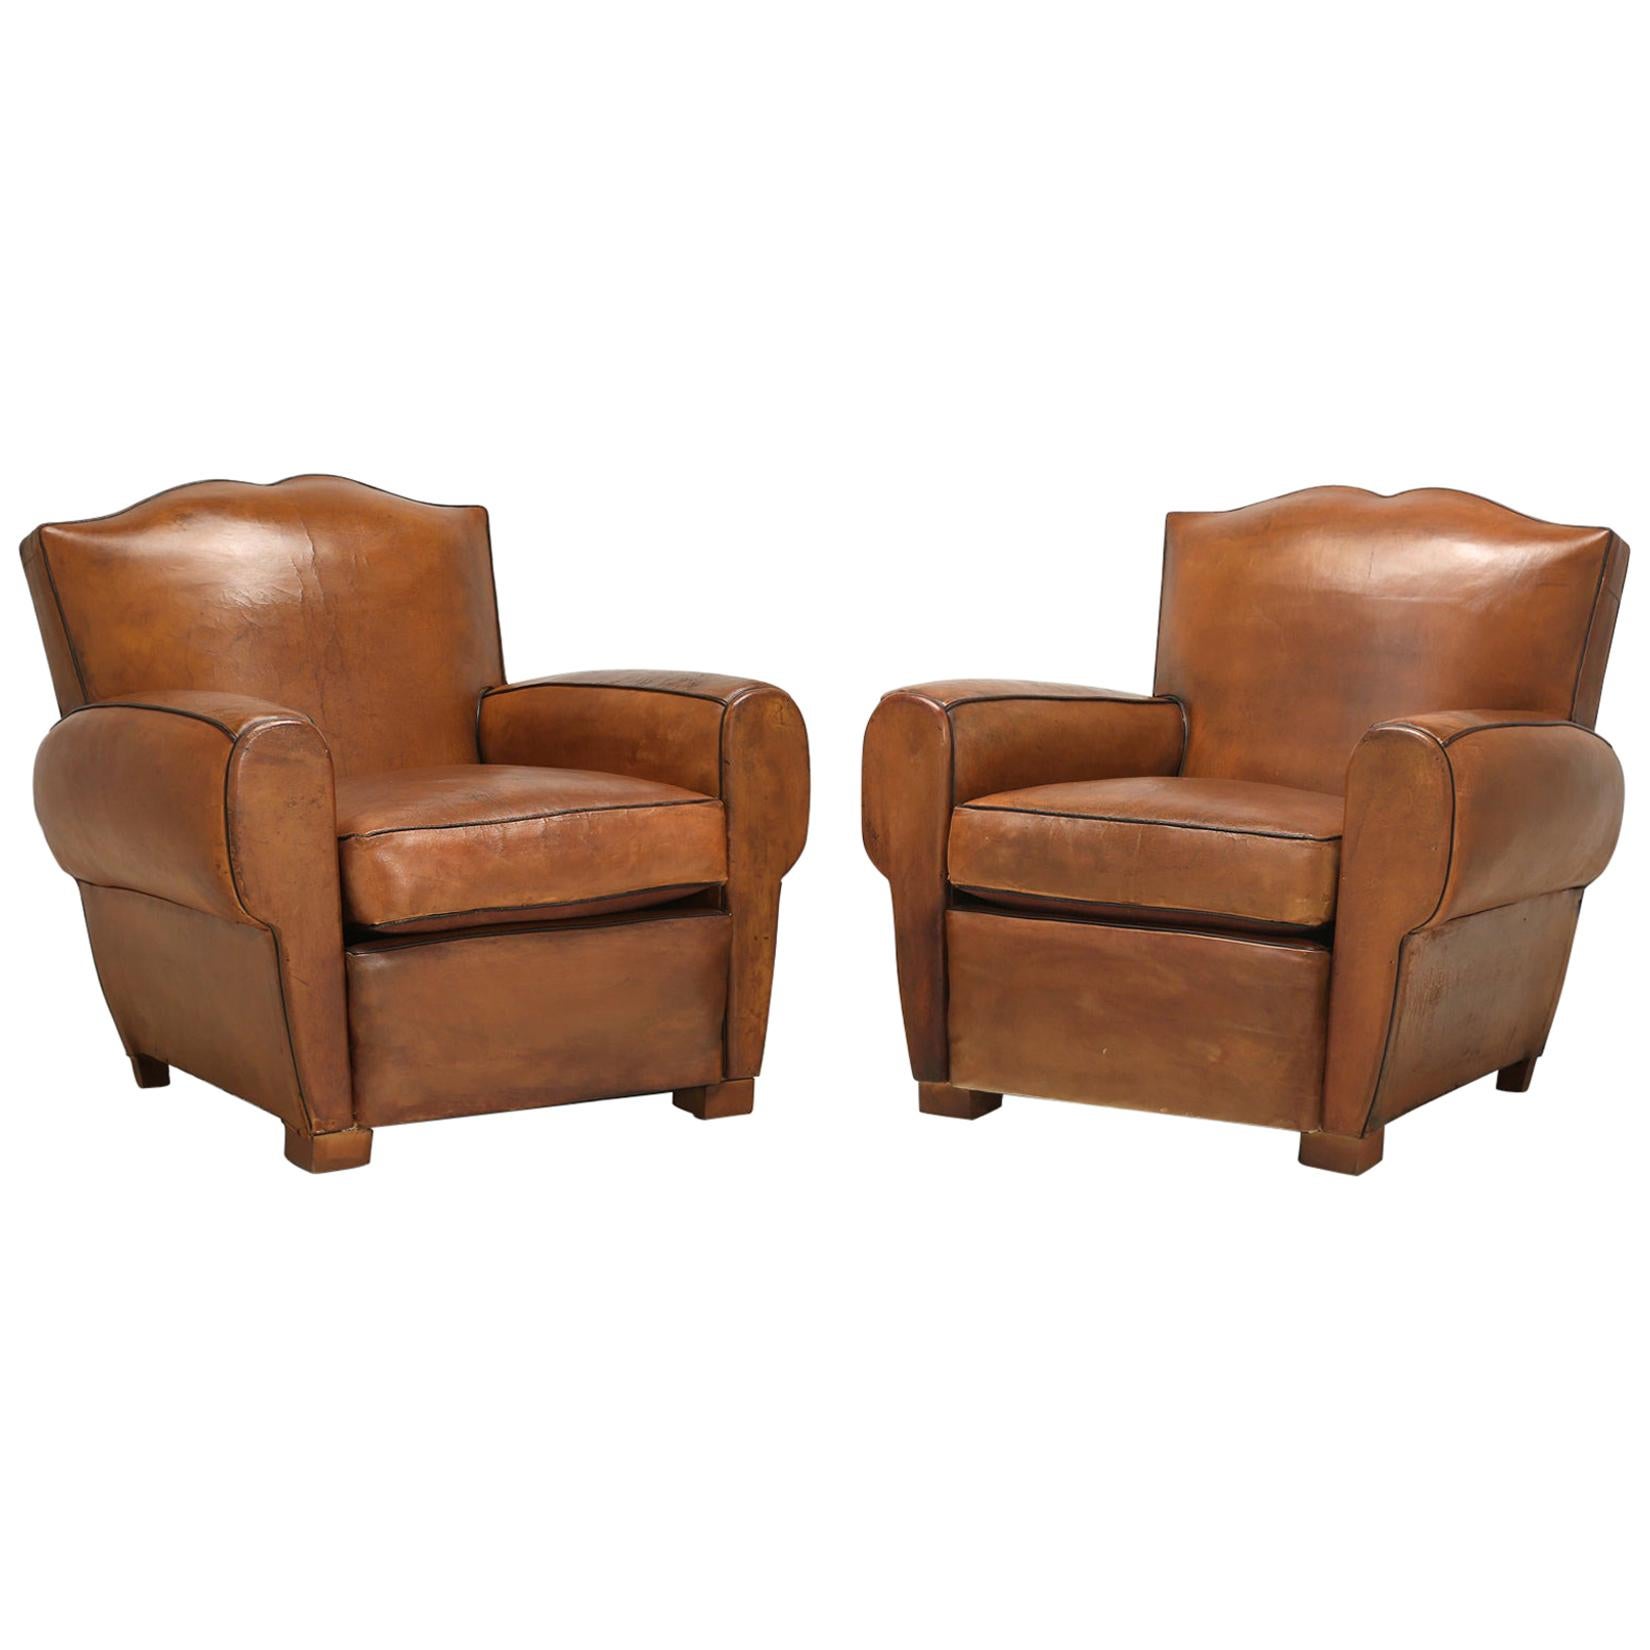 Pair of French Art Deco Moustache Back Leather Club Chairs Restored Internally